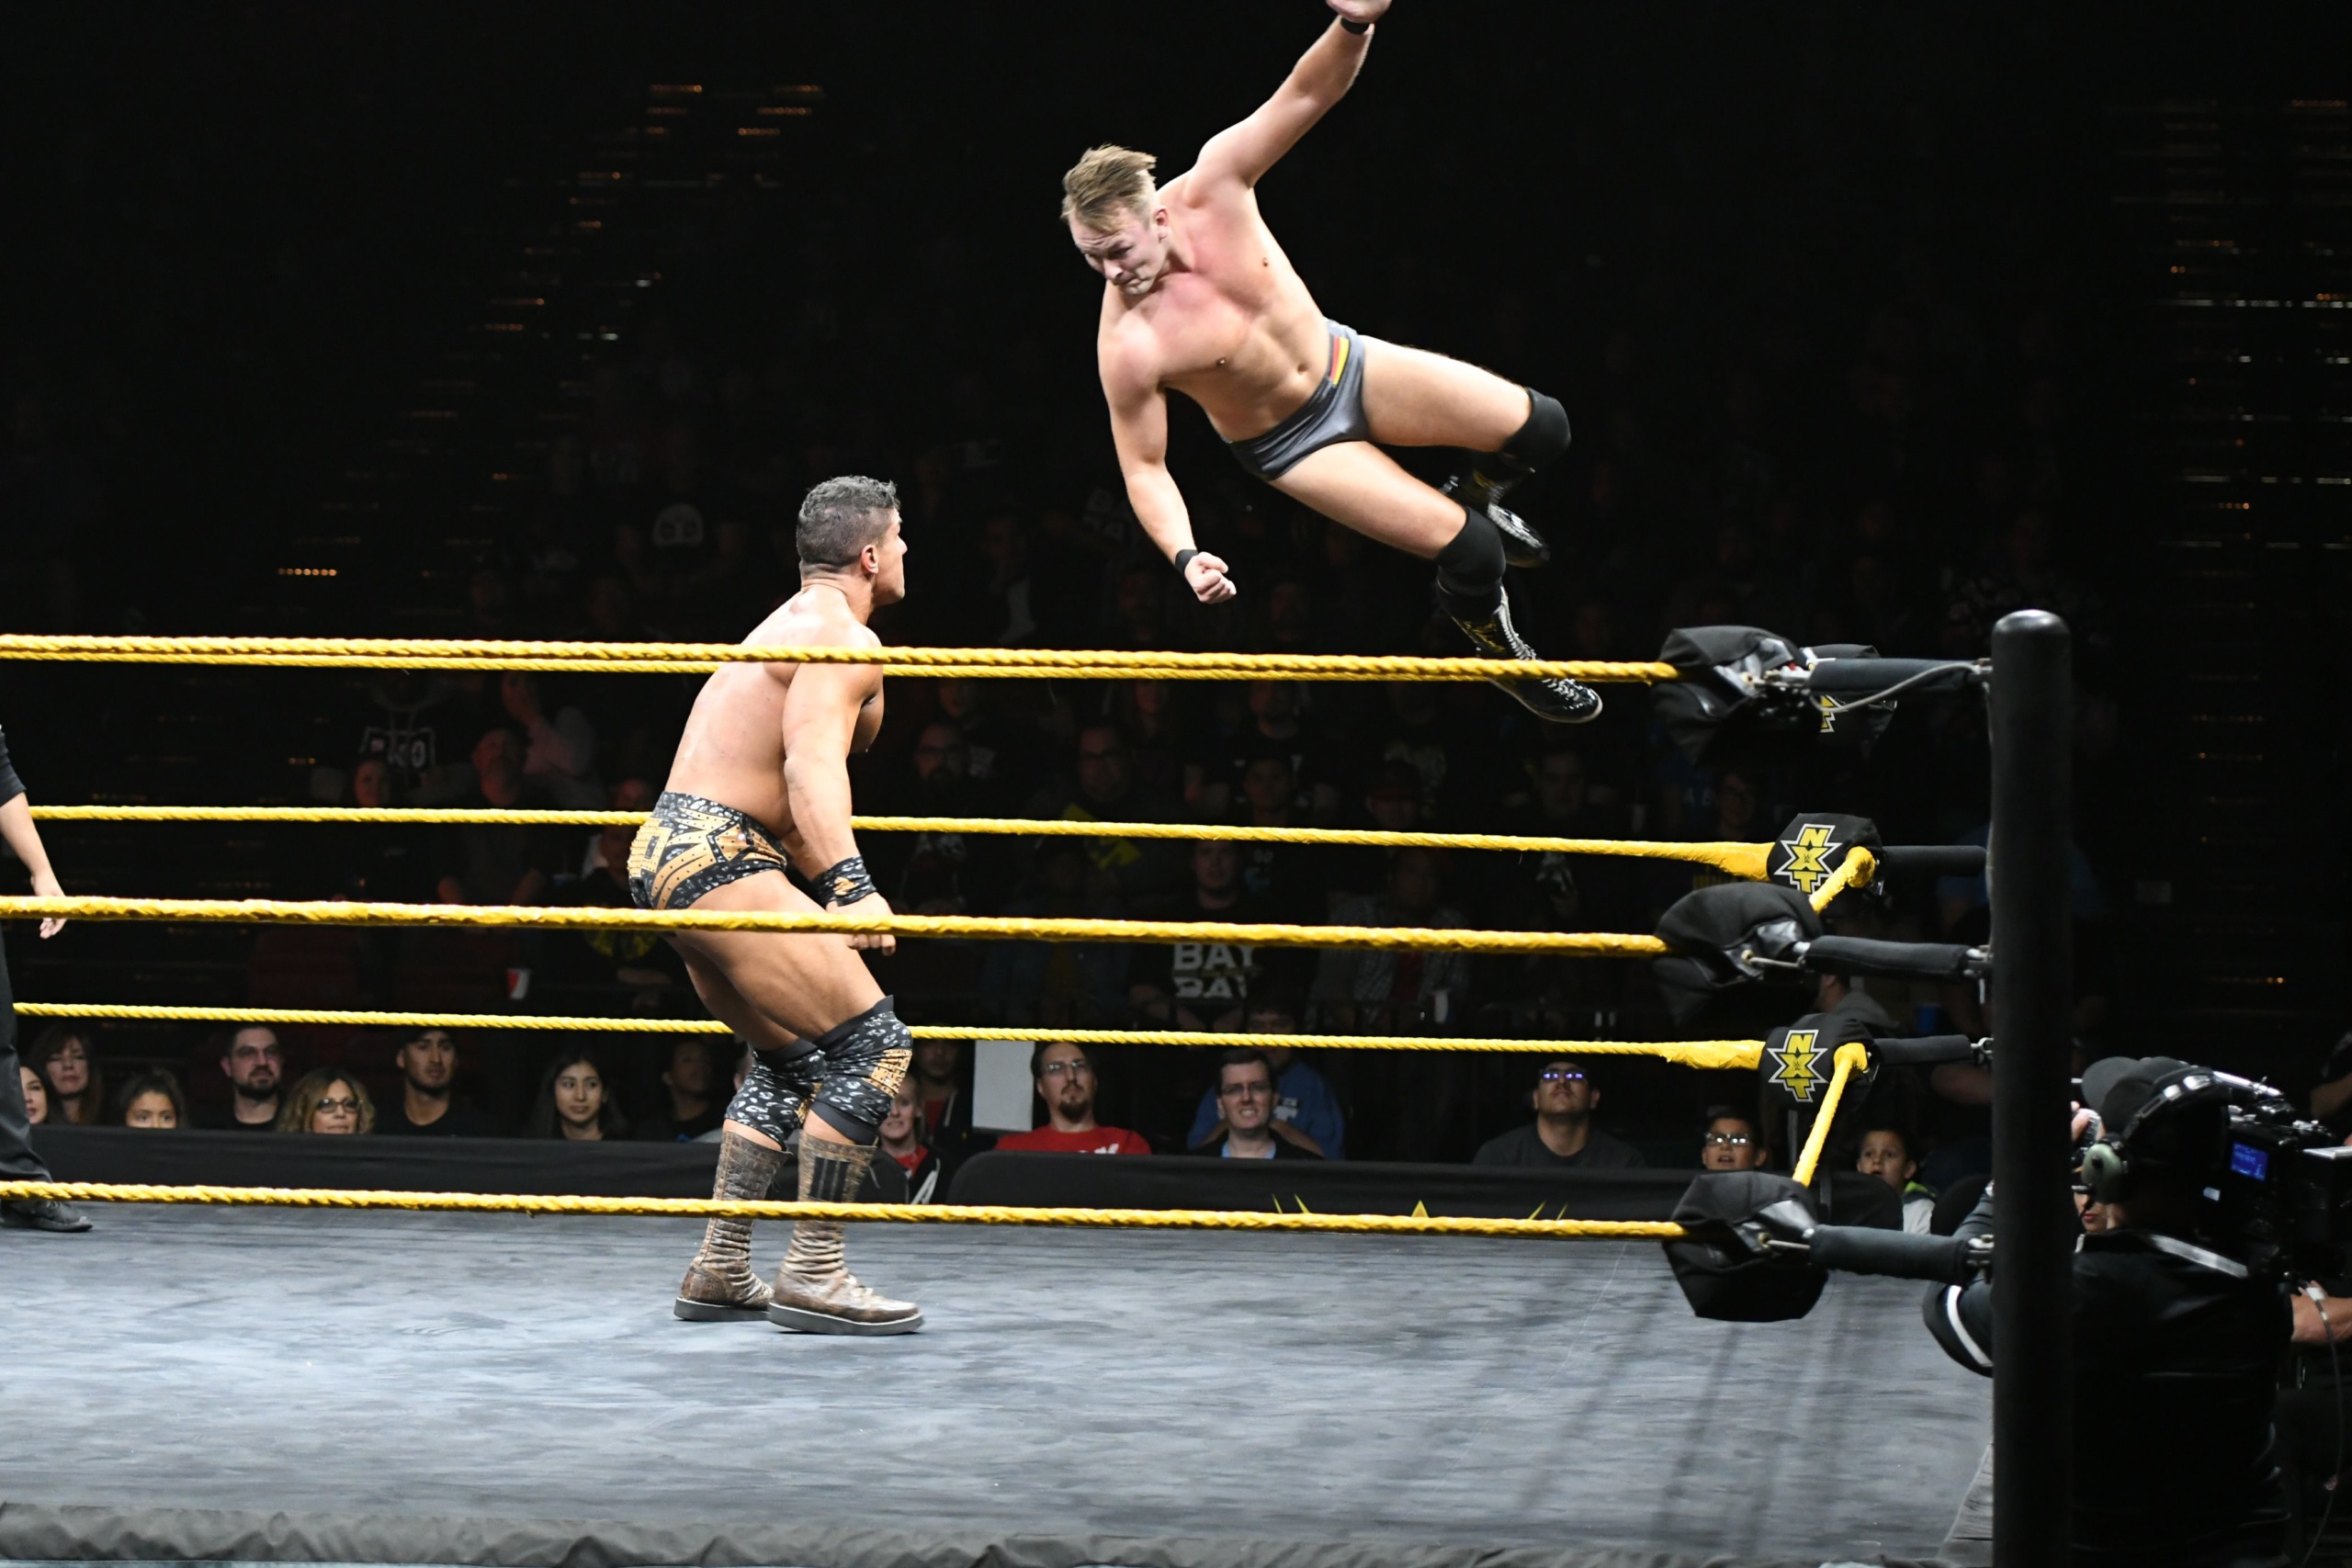 WWE jumps into SPAC space.